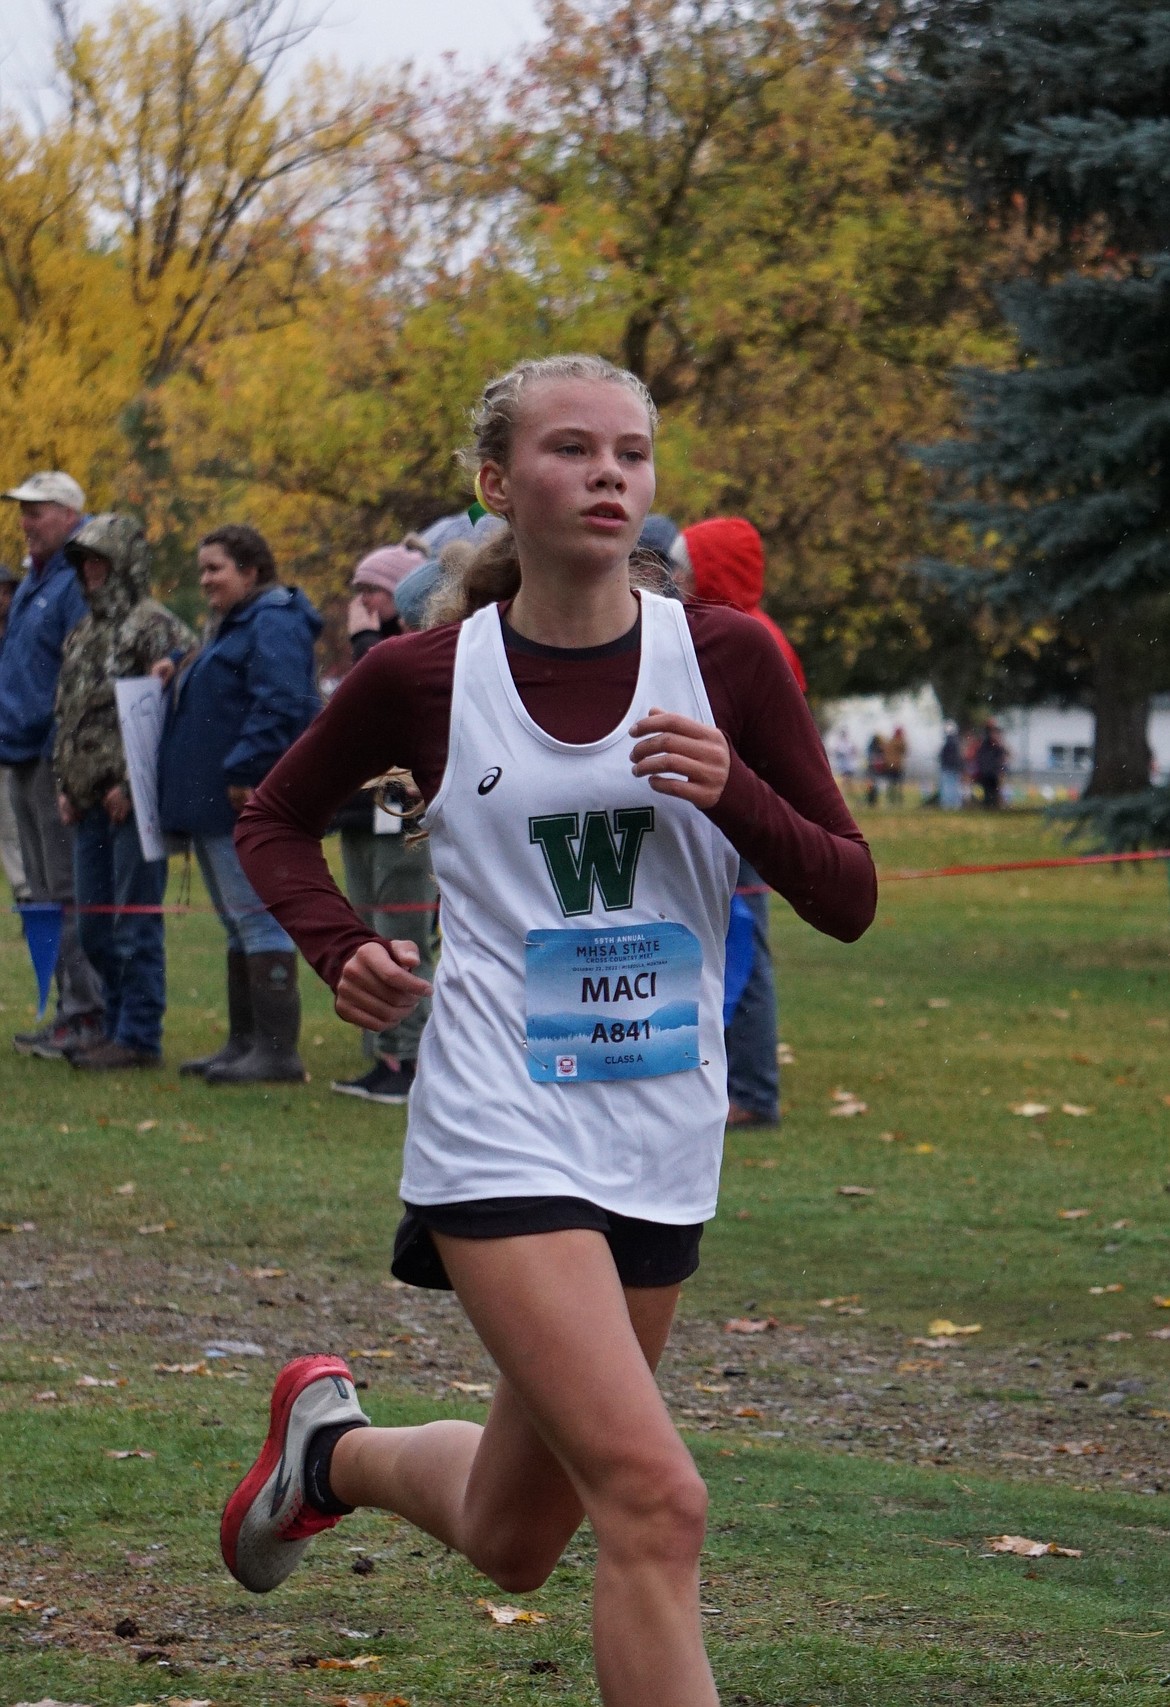 Freshman Maci Brennan competes in her first State Championship lowering her personal best time by over a minute (22:45). (Photo courtesy Matt Weller)